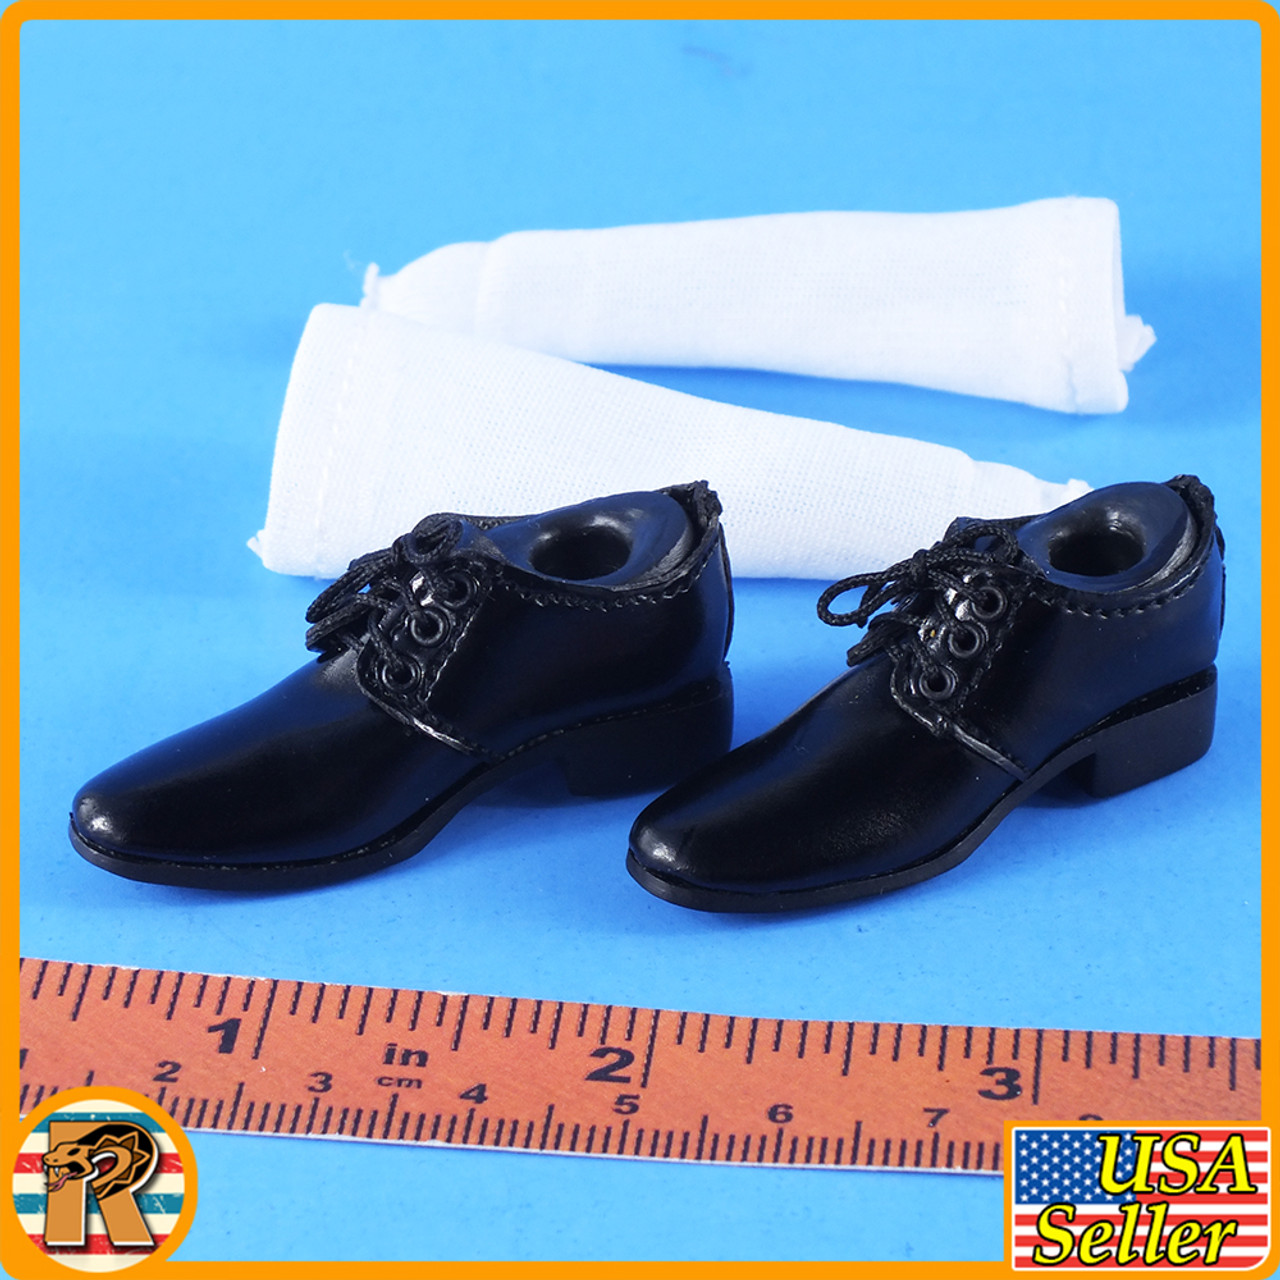 MR Bean - Shoes (for balls) w/ Socks - 1/6 Scale -